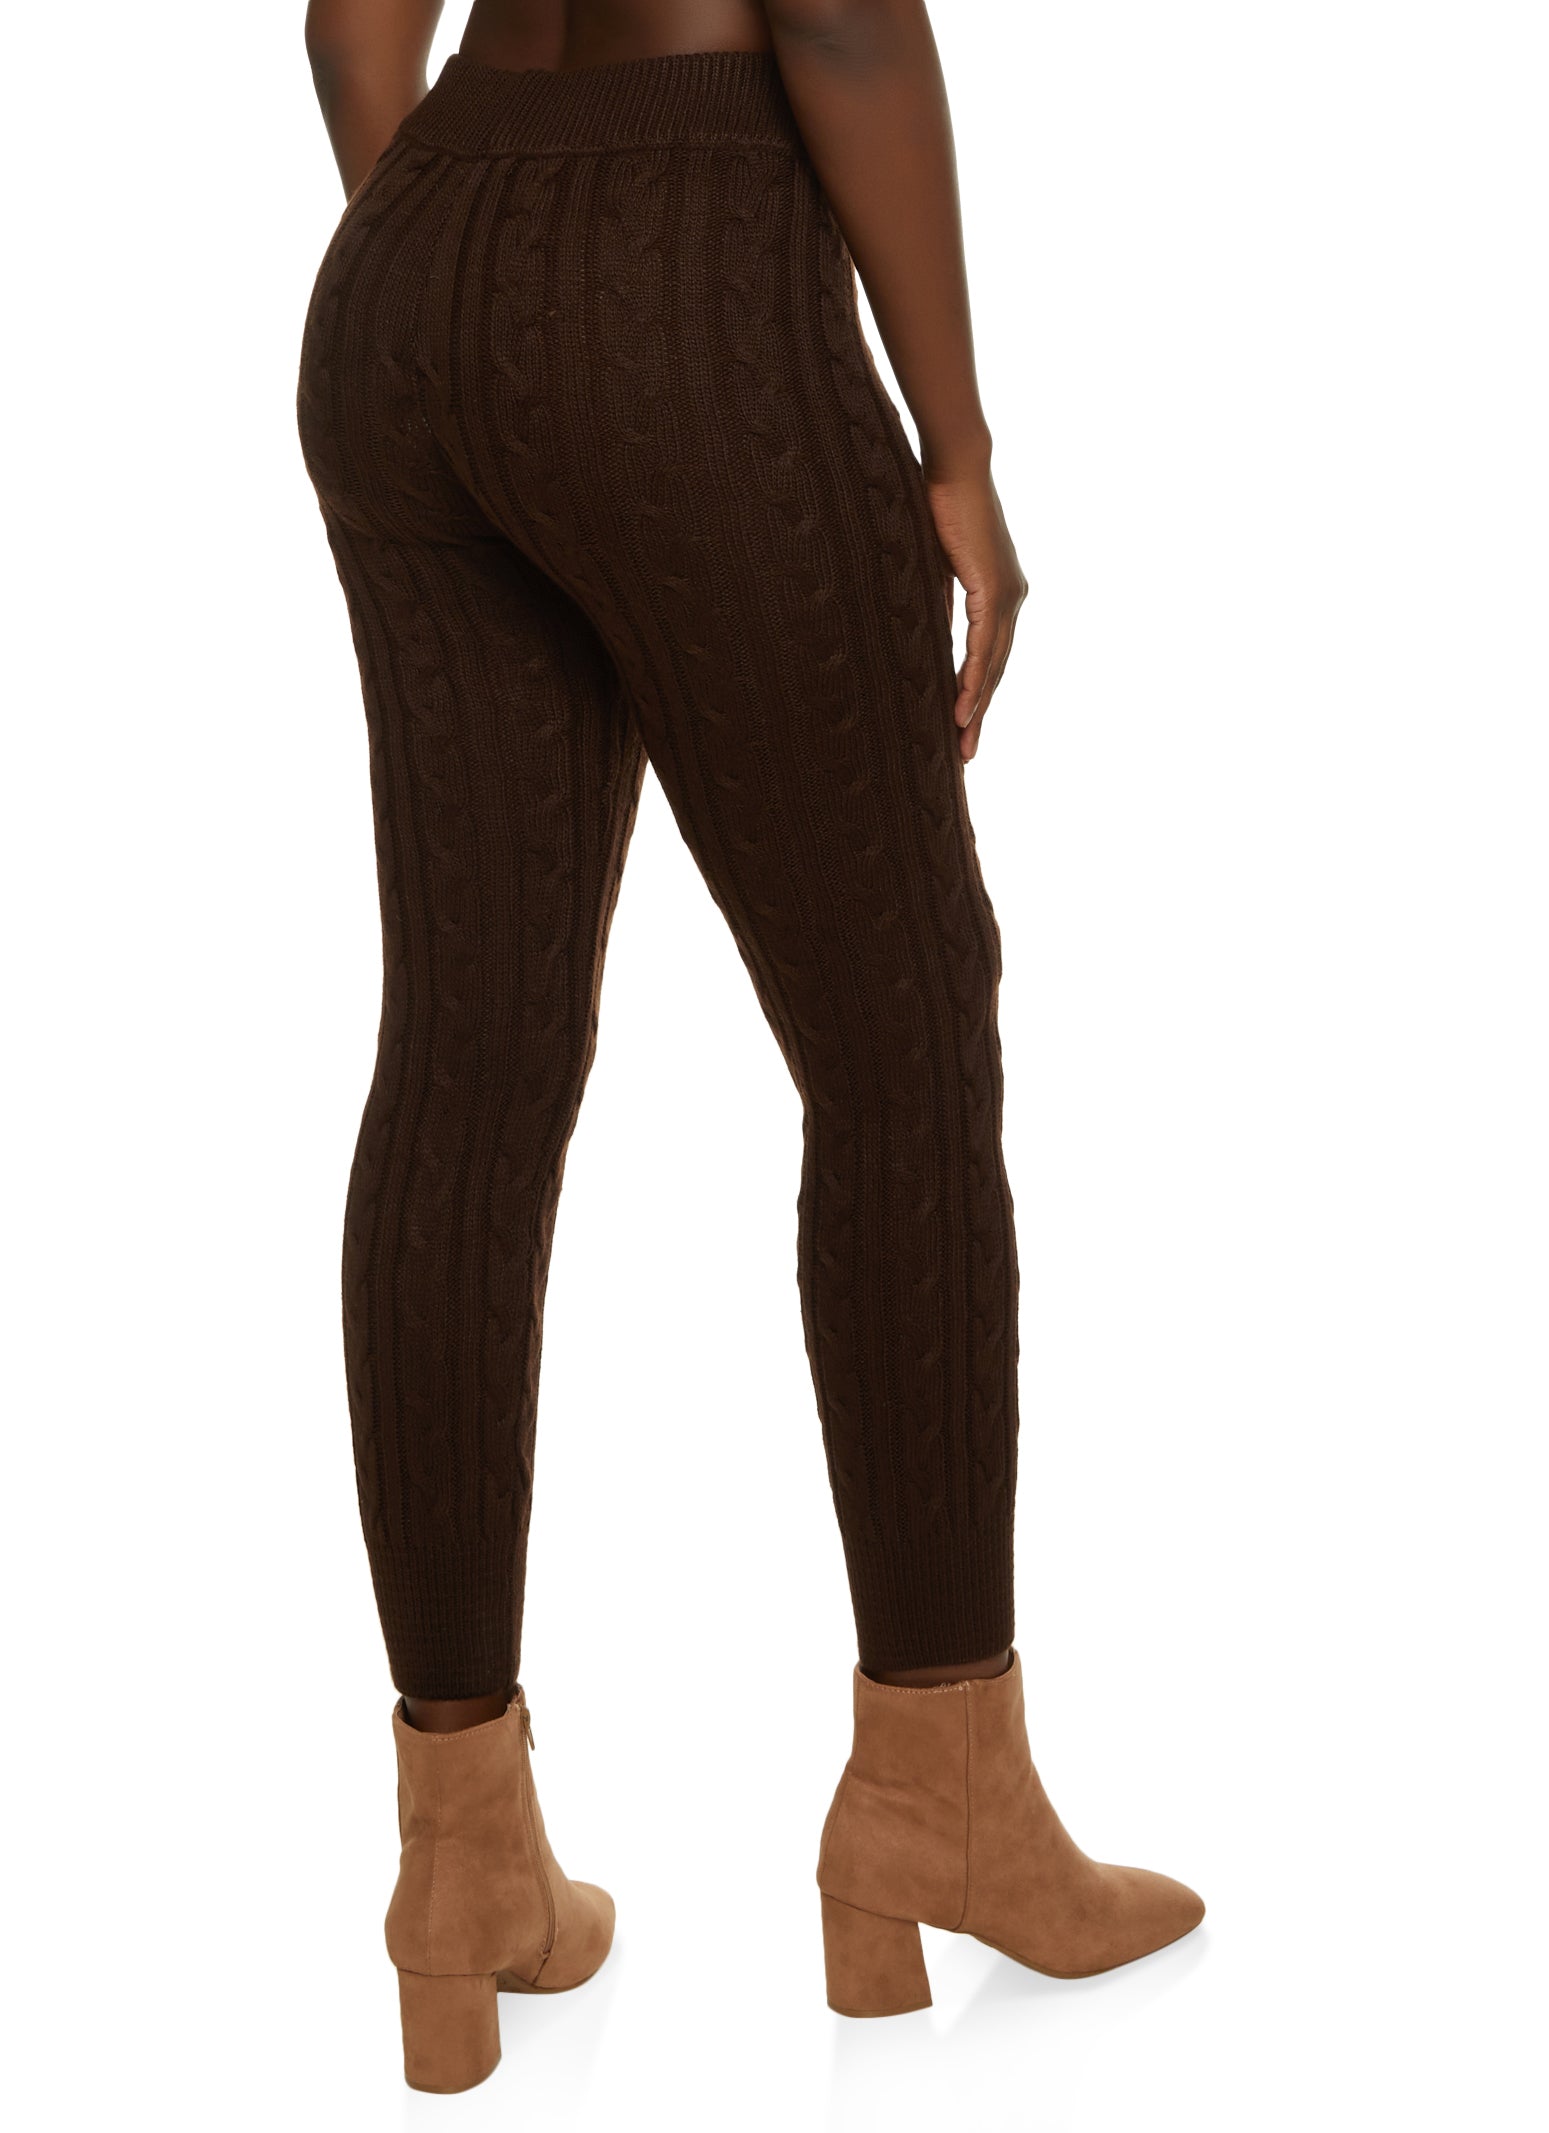 Rainbow Shops Womens Solid Seamless Ribbed High Waisted Leggings, Brown,  Size L-XL